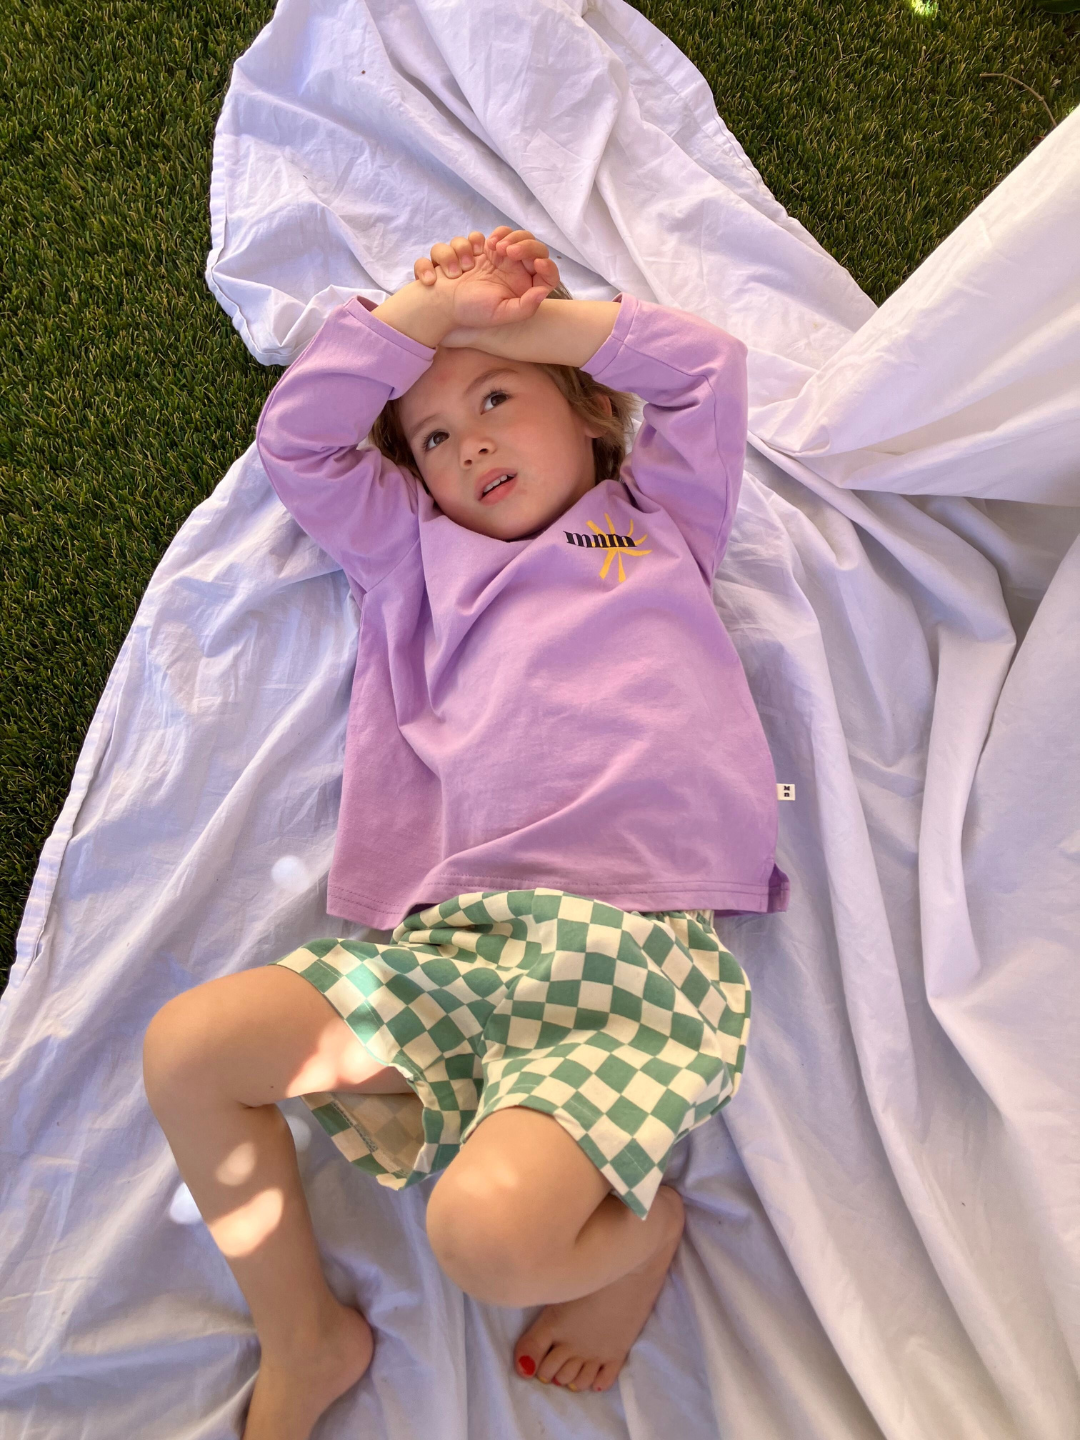 A child wearing the kids Frankie Short in Teal & Ivory check, paired with a purple long sleeved tshirt with a small graphic on the chest. He is lying on a white picnic cloth on grass.